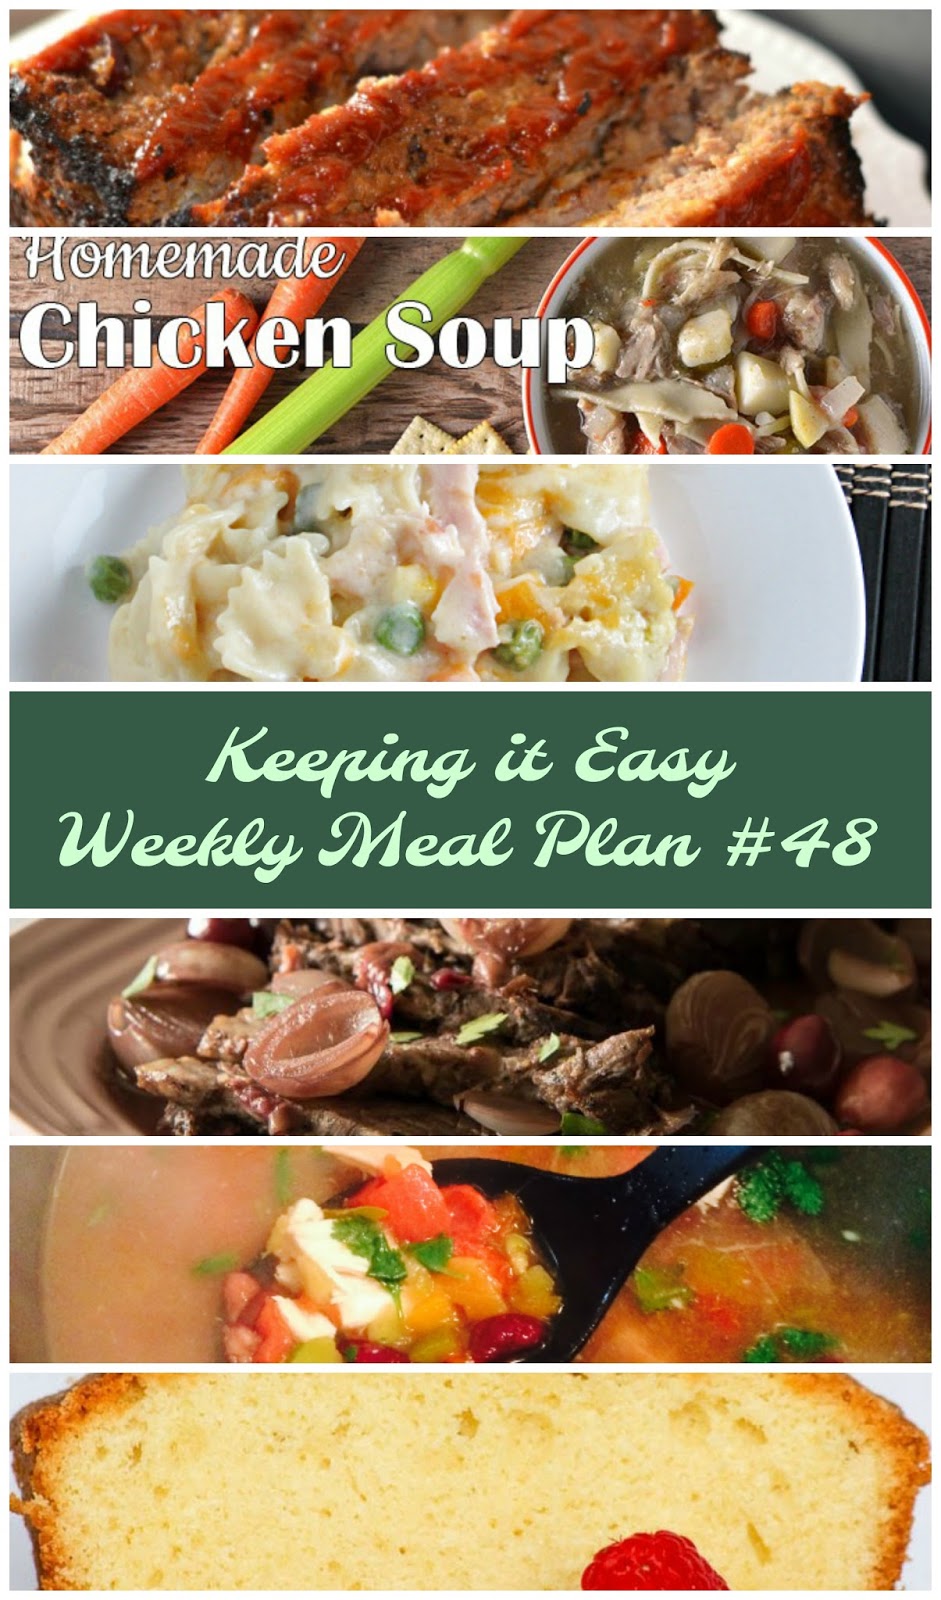 Family Dinner Menu Ideas for the week